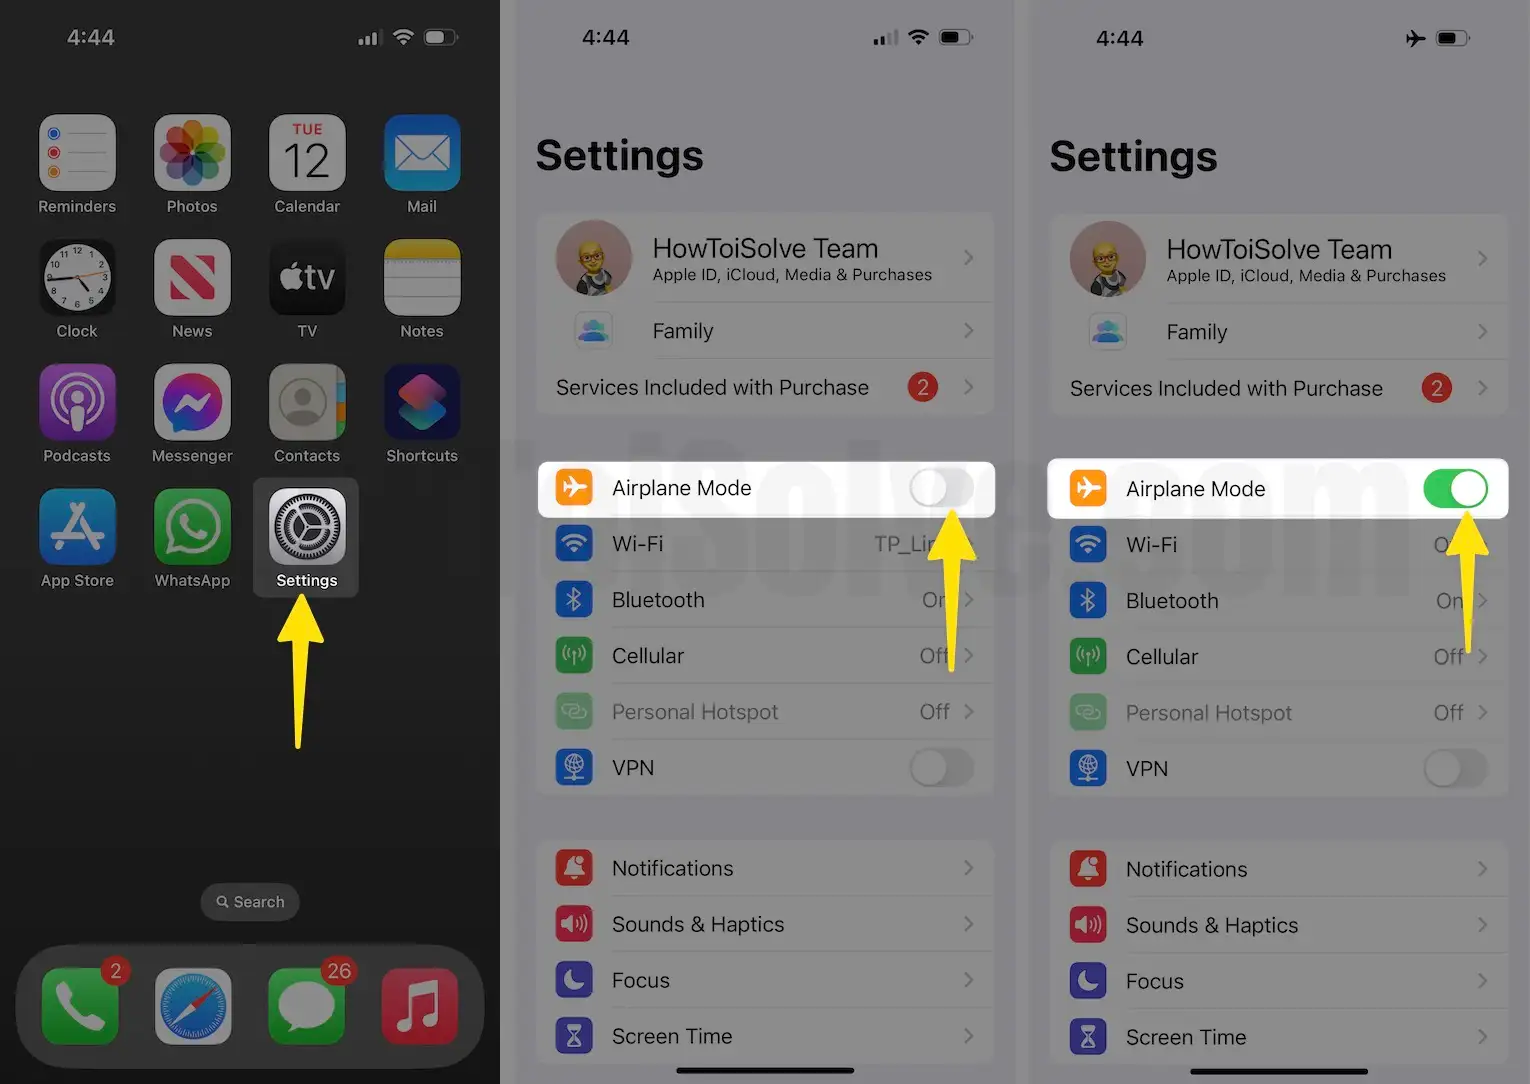 Open the settings toggle ON airplance mode on iPhone